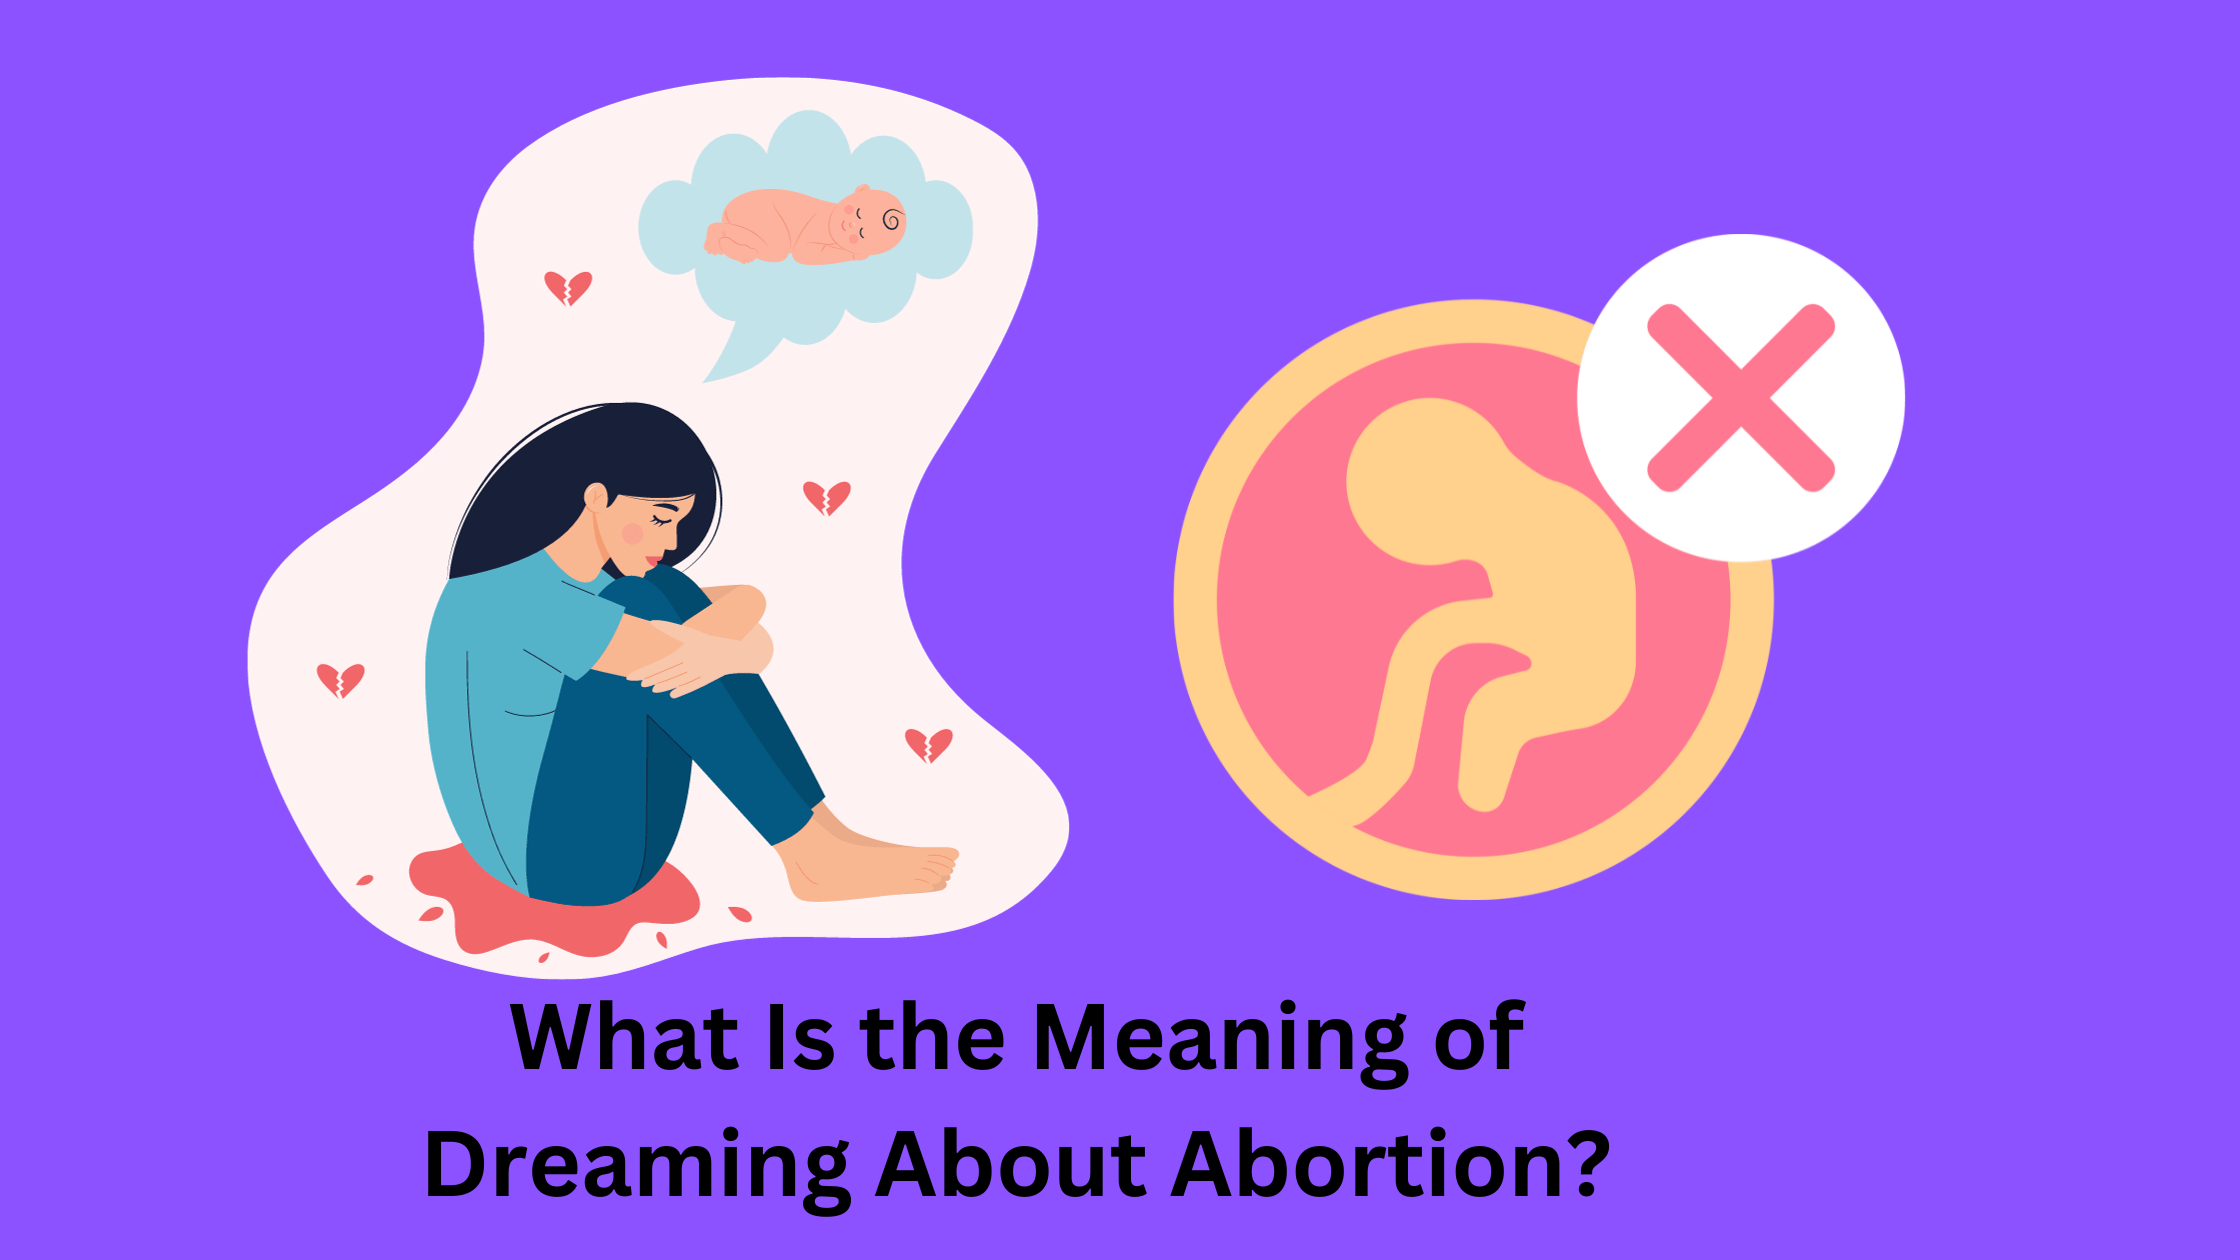 What Is the Meaning of Dreaming About Abortion